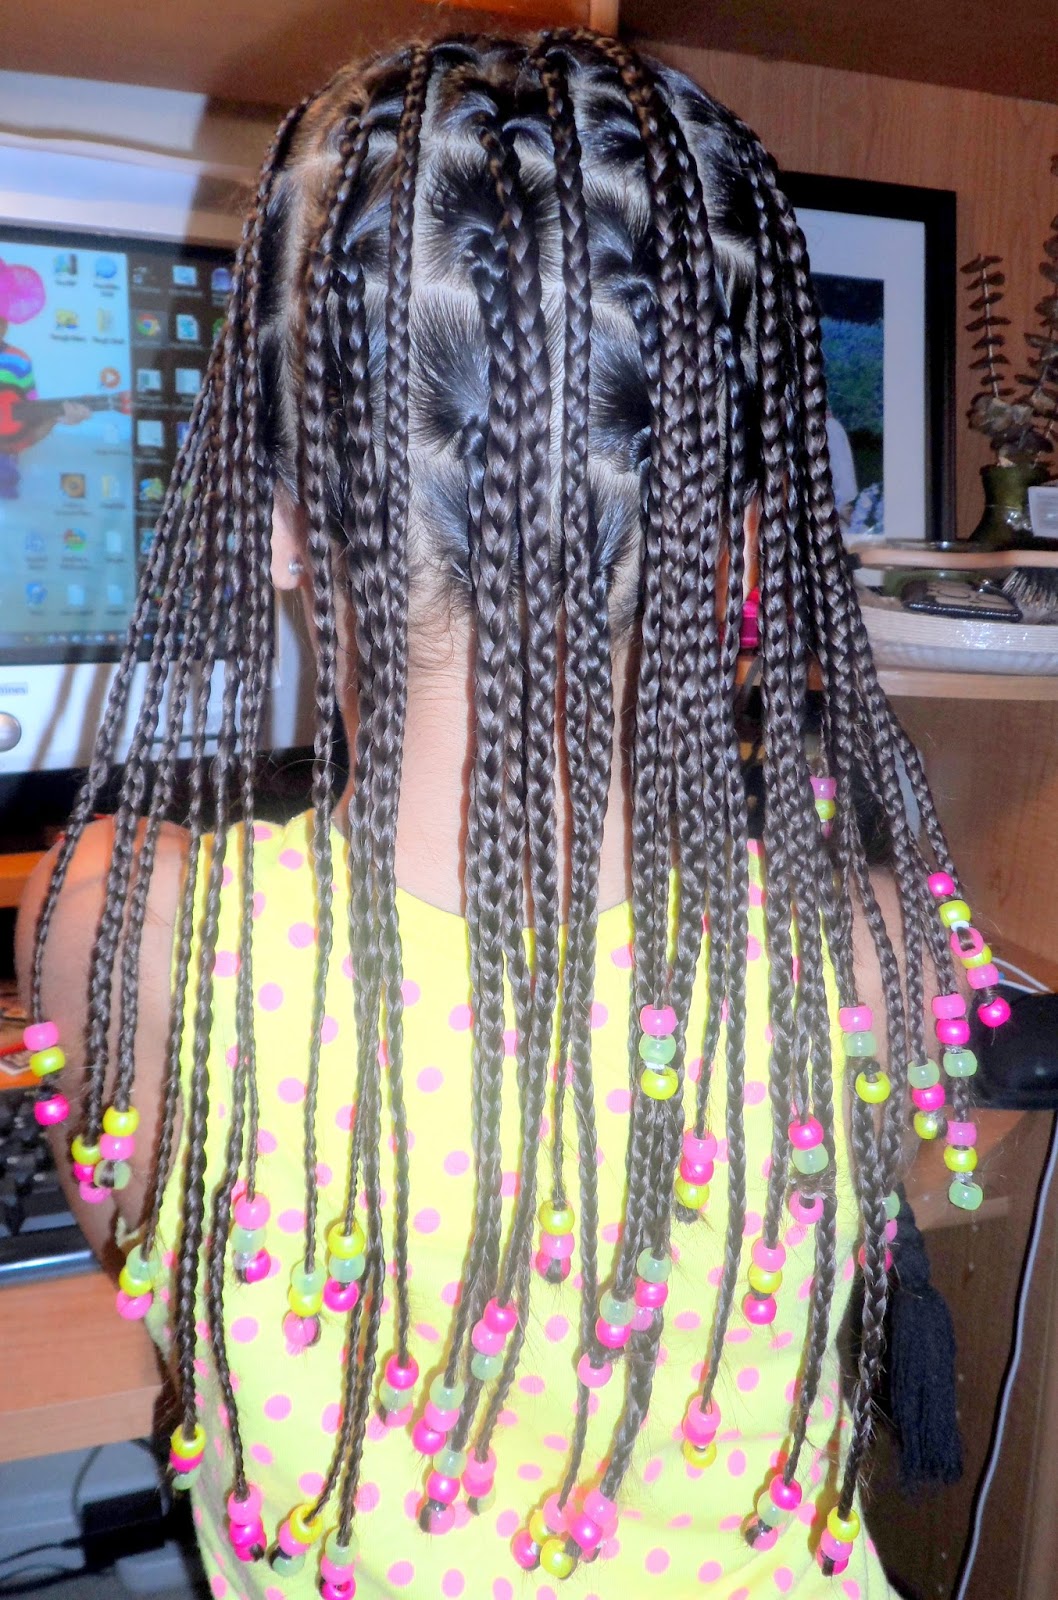 Life's Perception & Inspiration: Braided Hair with Beads